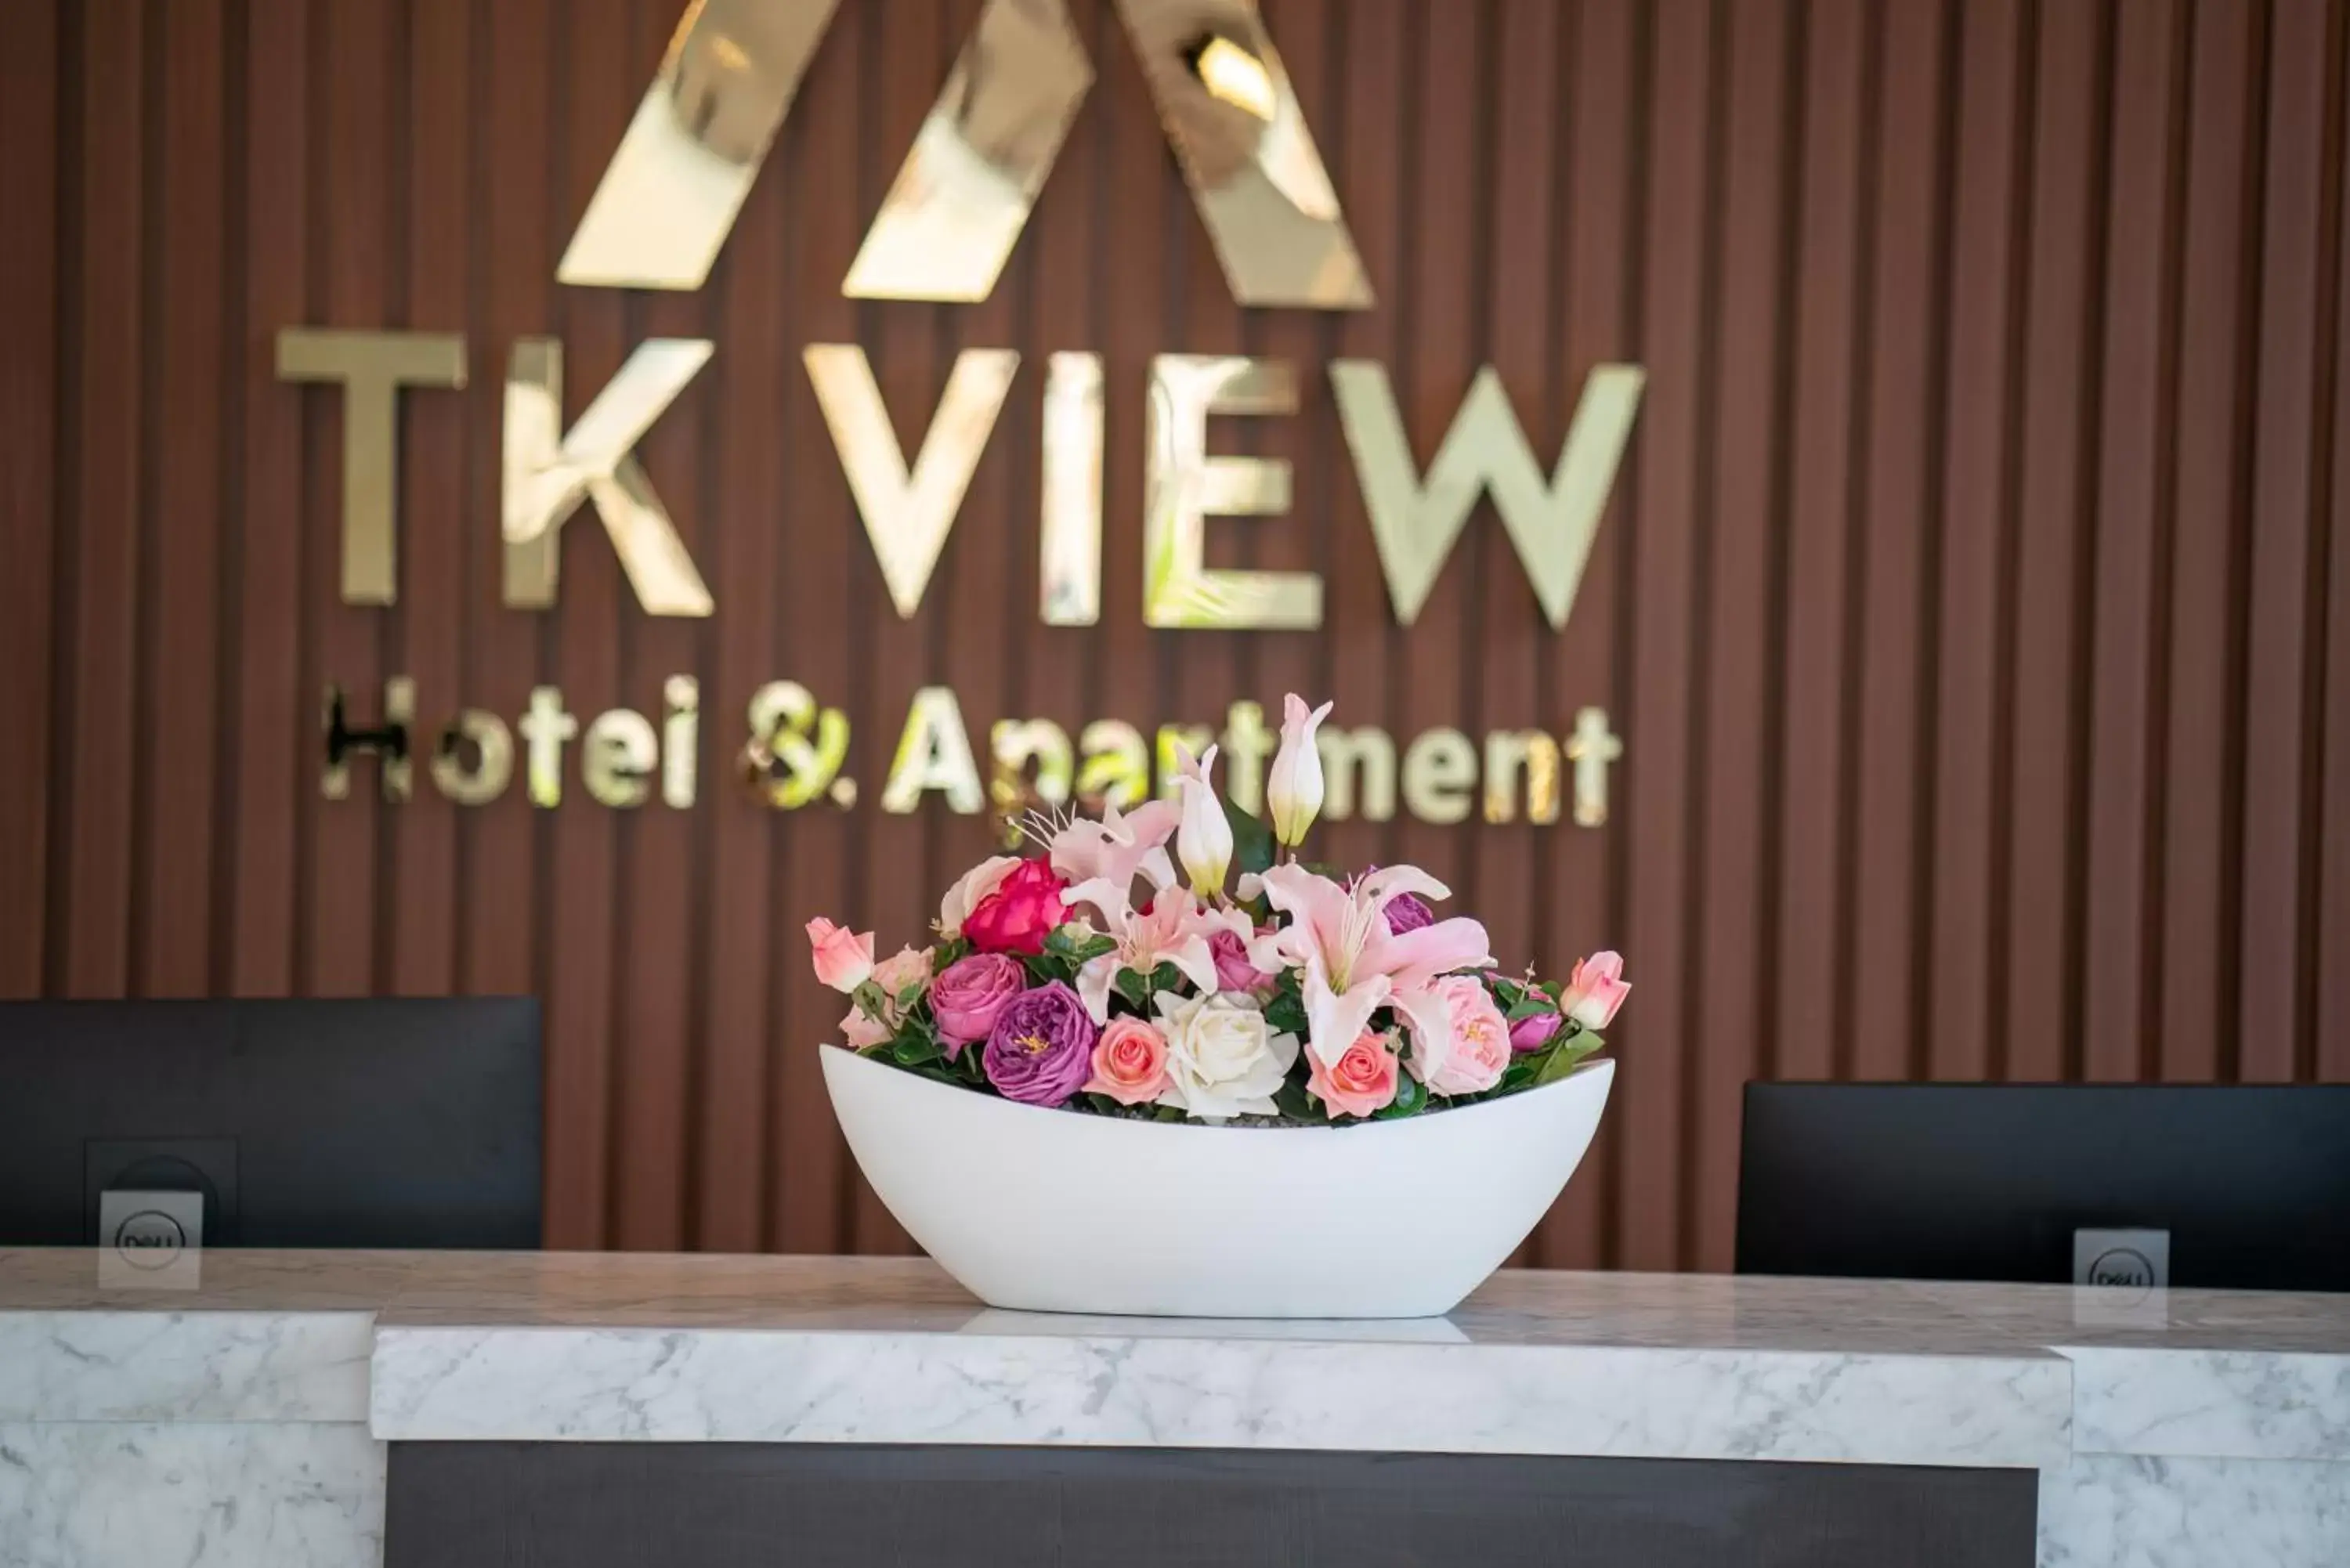 Property logo or sign in TK VIEW HOTEL & APARTMENT